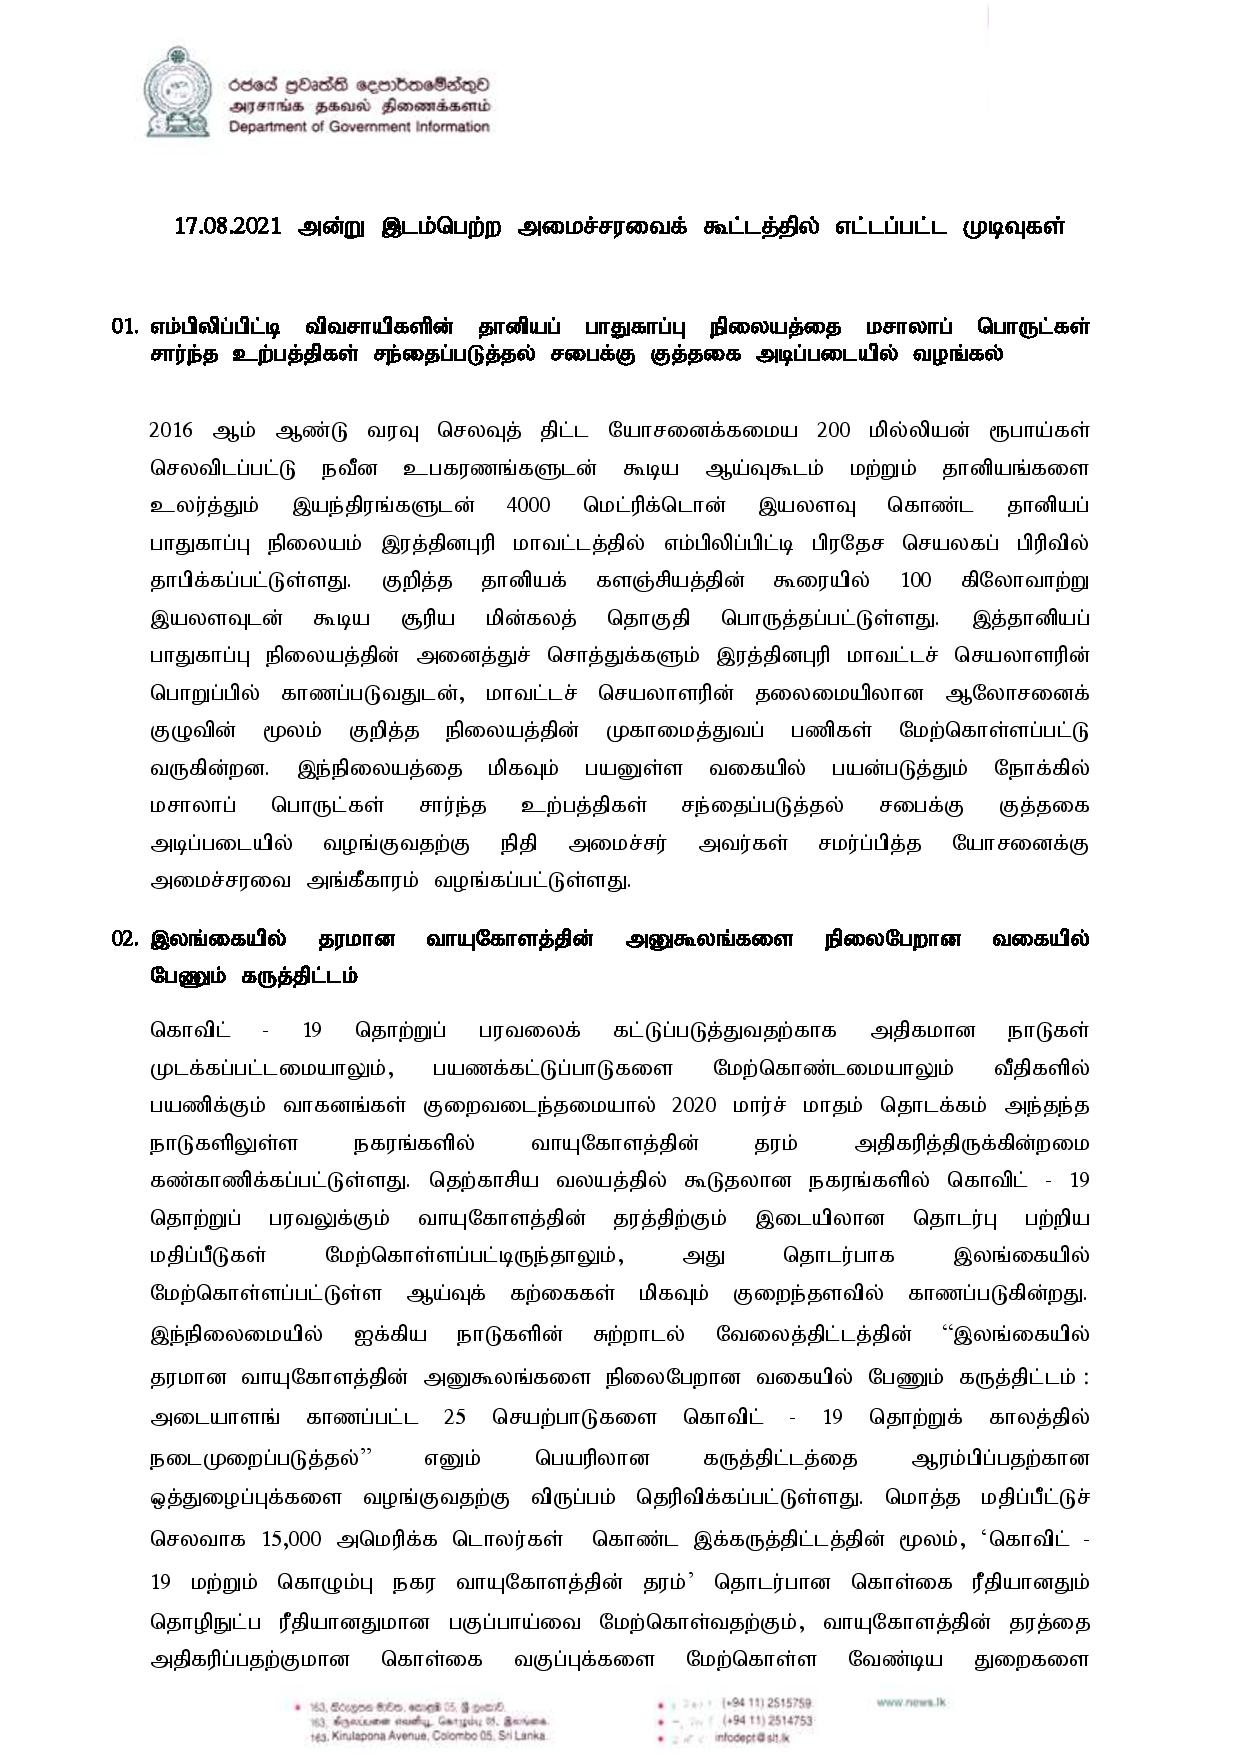 Cabinet Decision on 17.08.2021 Tamil page 001